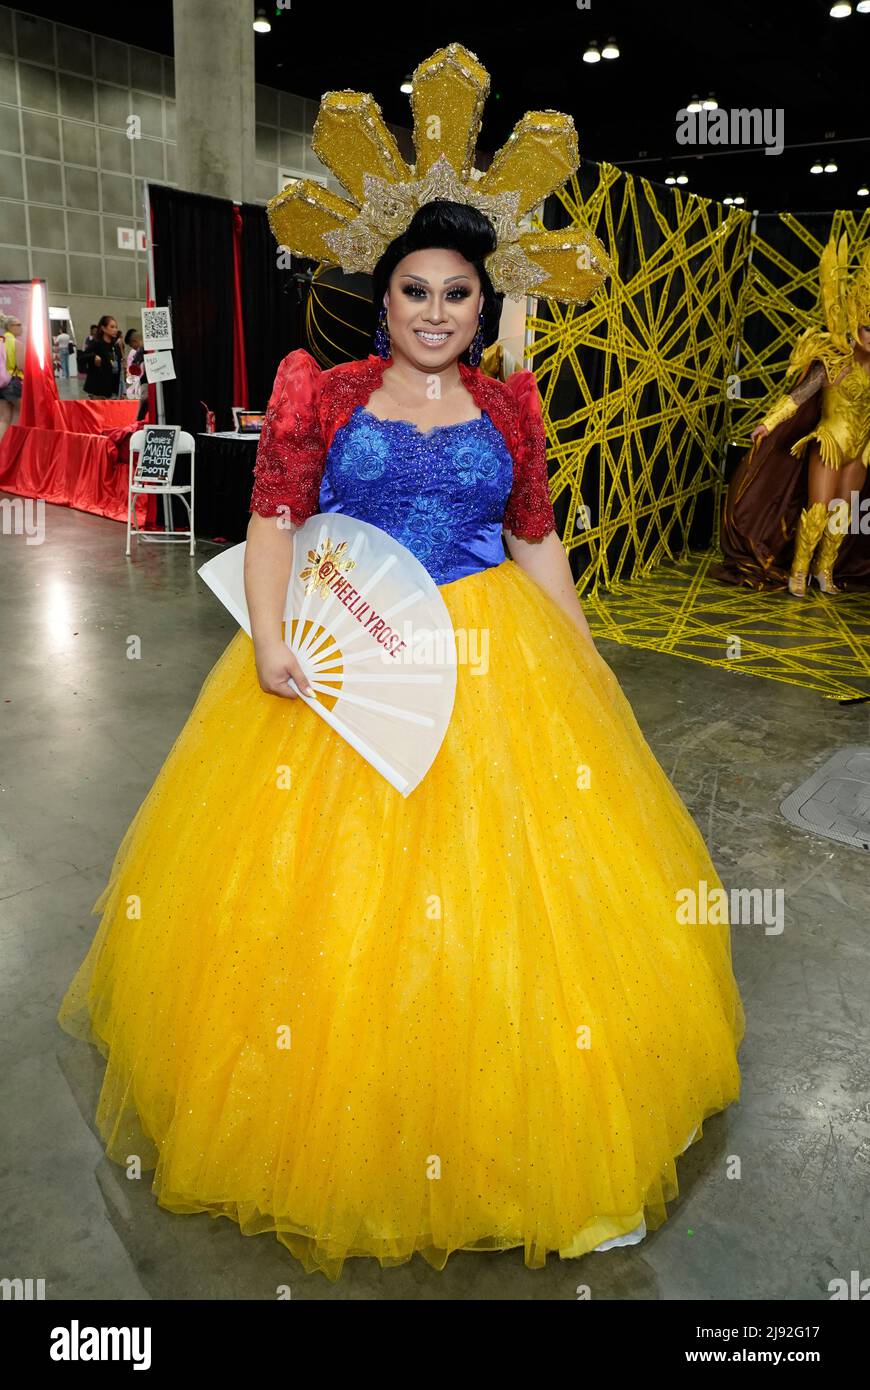 Lily Rose during the 2022 RuPaul DragCon, Day 2, held at the LA Convention Center in Los Angeles, California, Friday, May 14, 2022.  Photo by Jennifer Graylock-Graylock.com Stock Photo